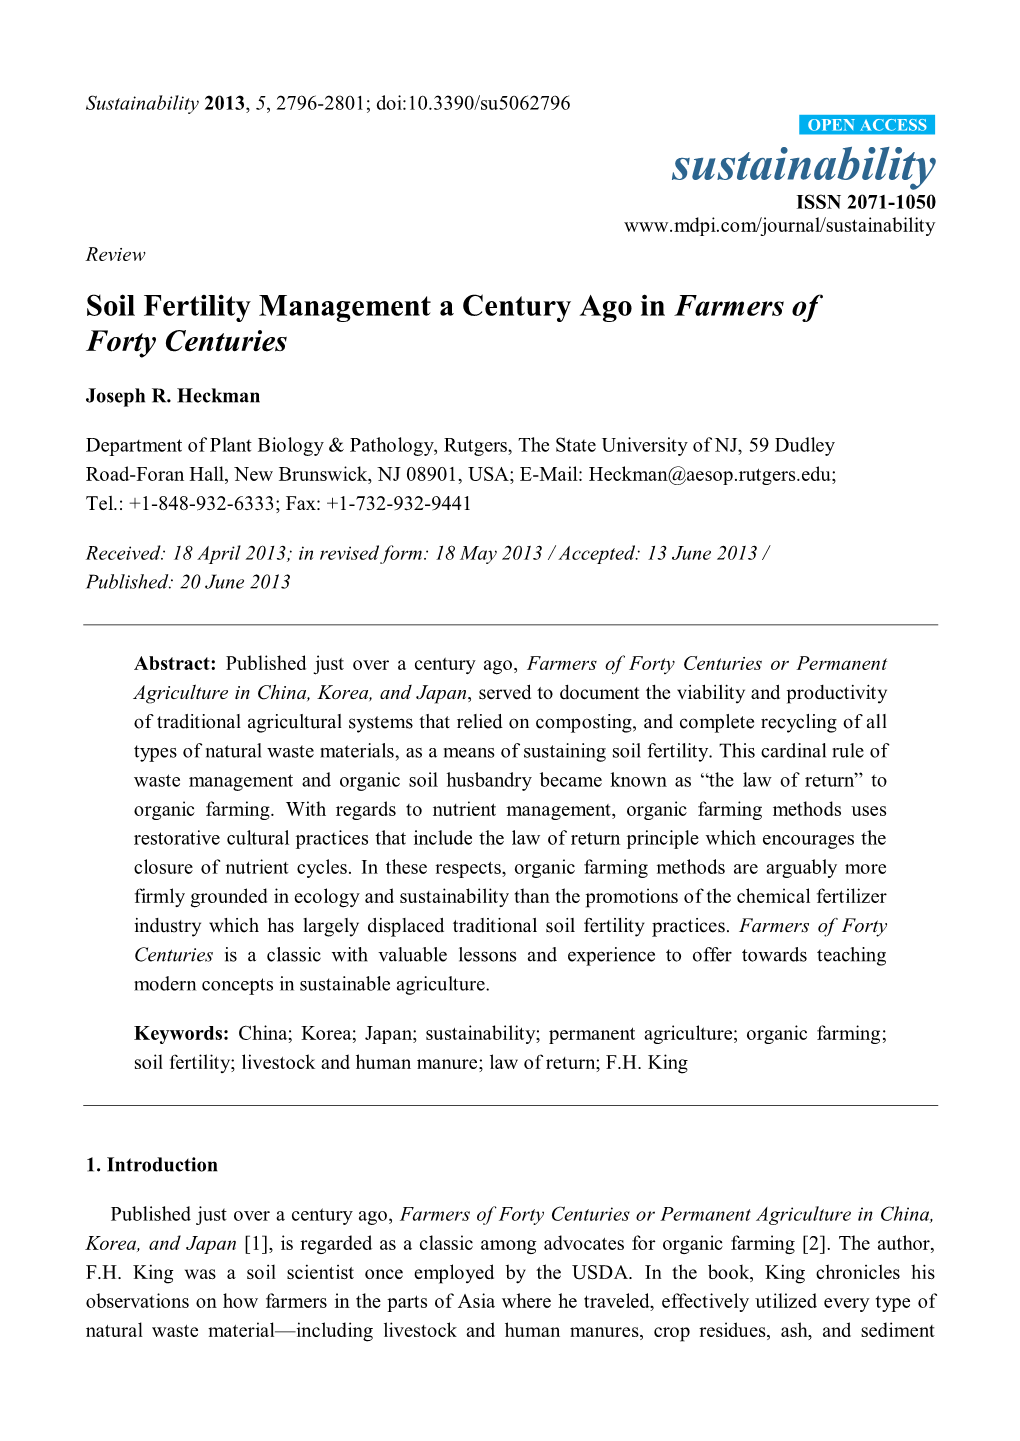 Soil Fertility Management a Century Ago in Farmers of Forty Centuries